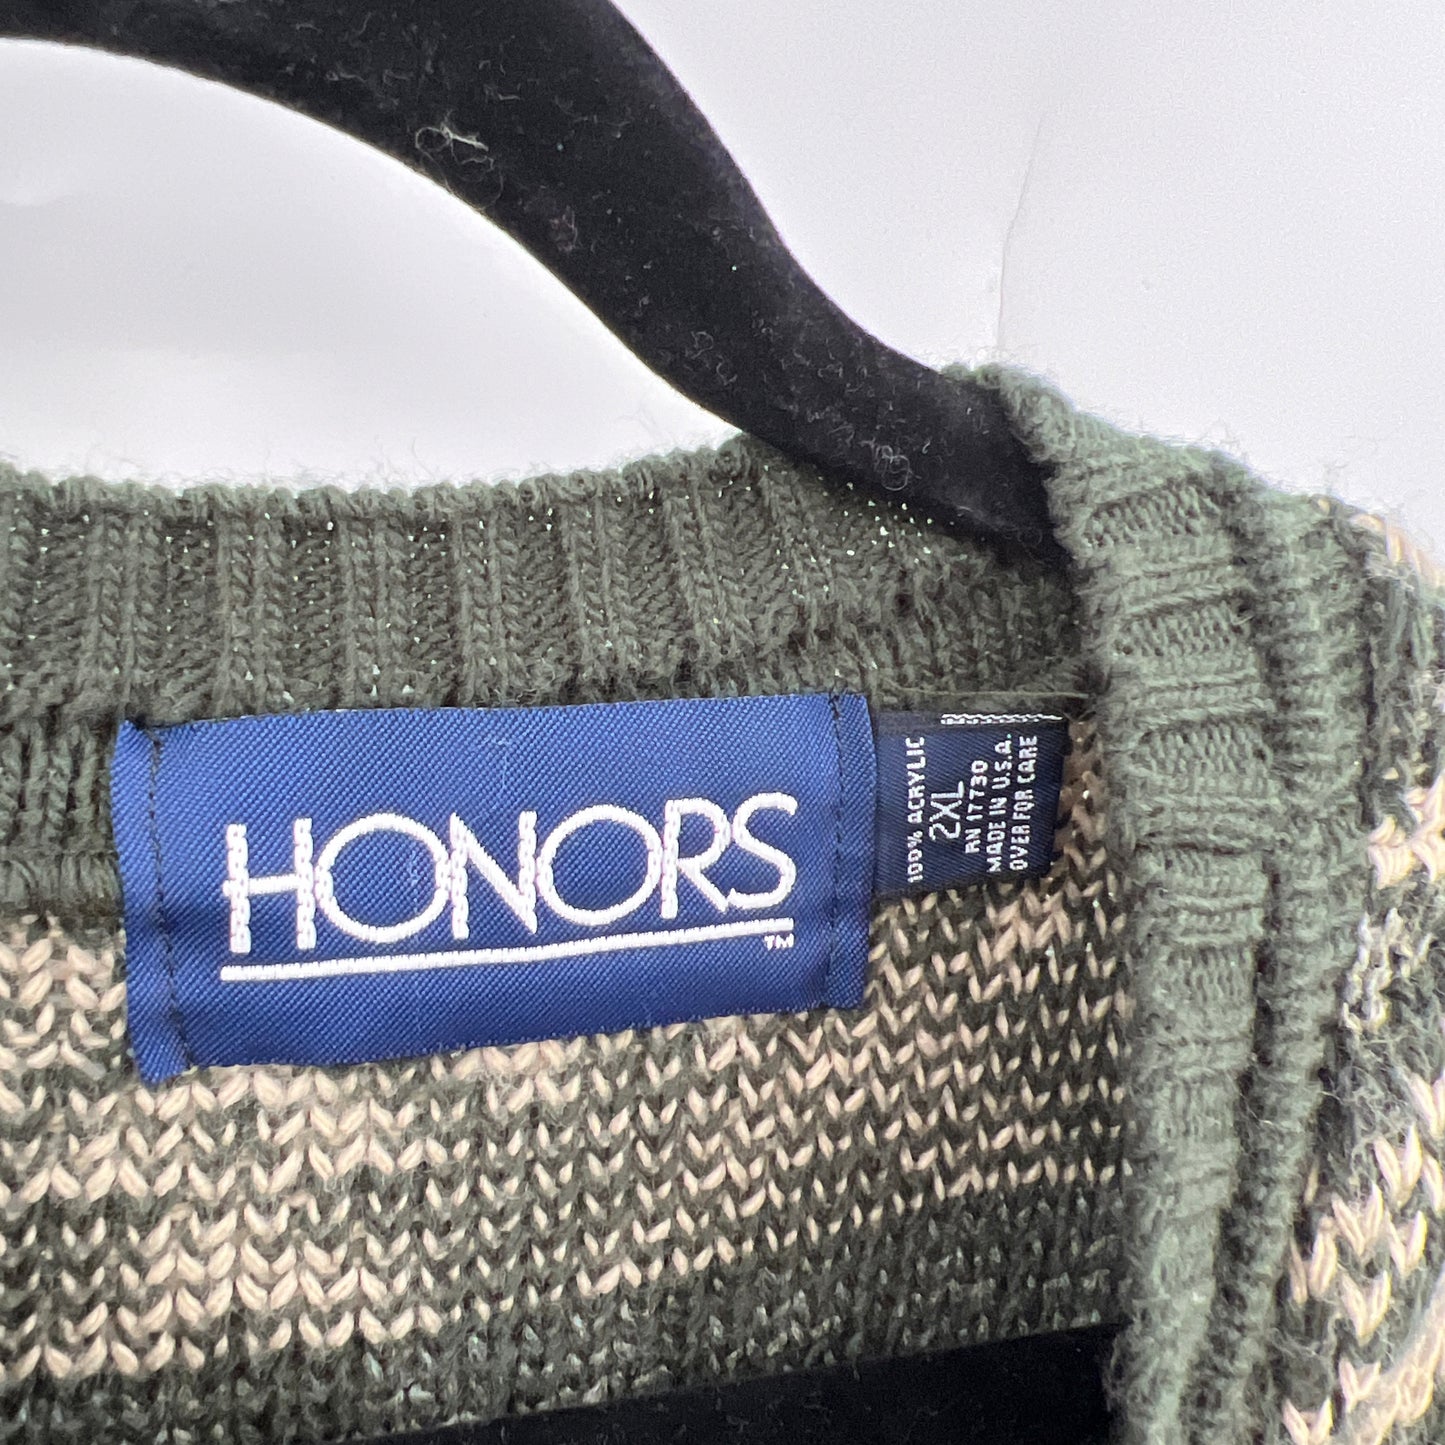 SOLD. Vintage Honors Unisex Acrylic Sweater